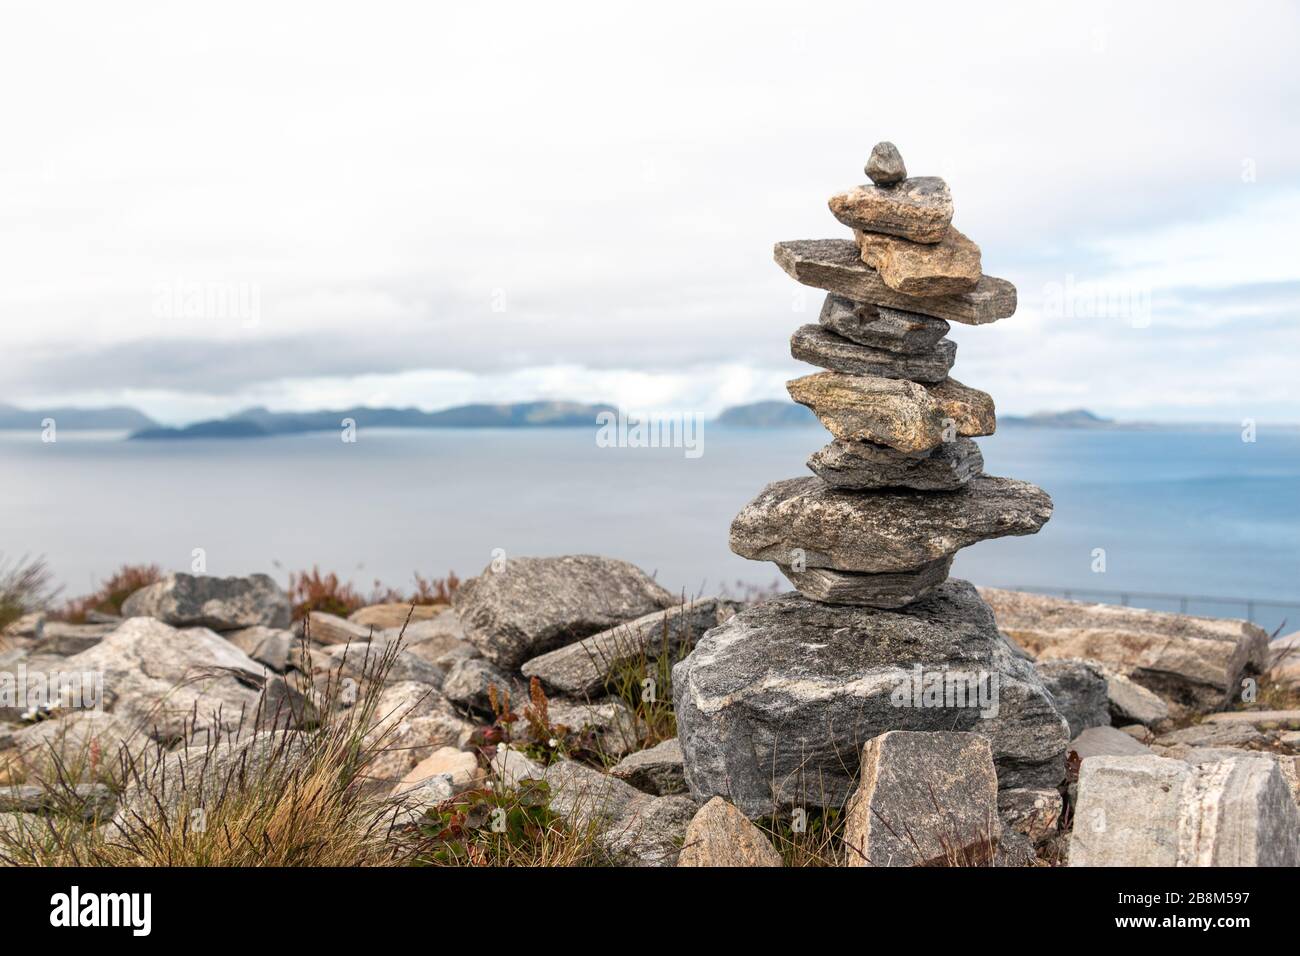 Stack of stones balancing on top of each other. Ocean and clouds in background. Rocks on the ground. Stock Photo